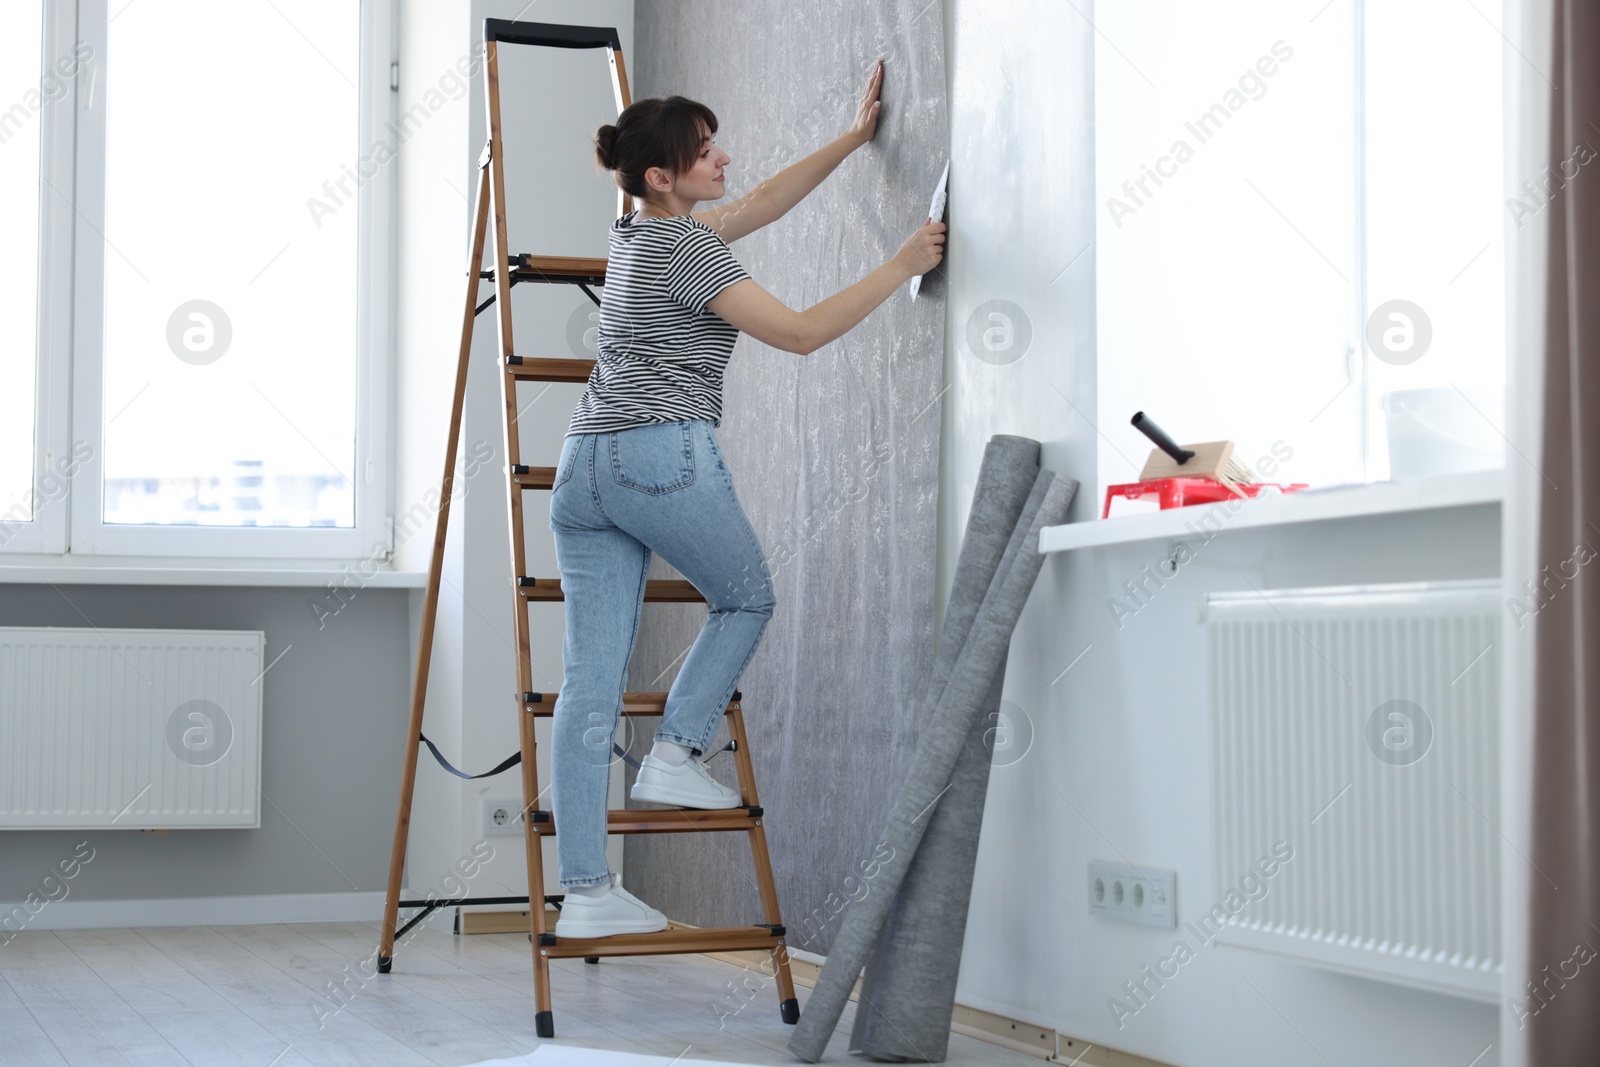 Photo of Woman smoothing stylish gray wallpaper in room